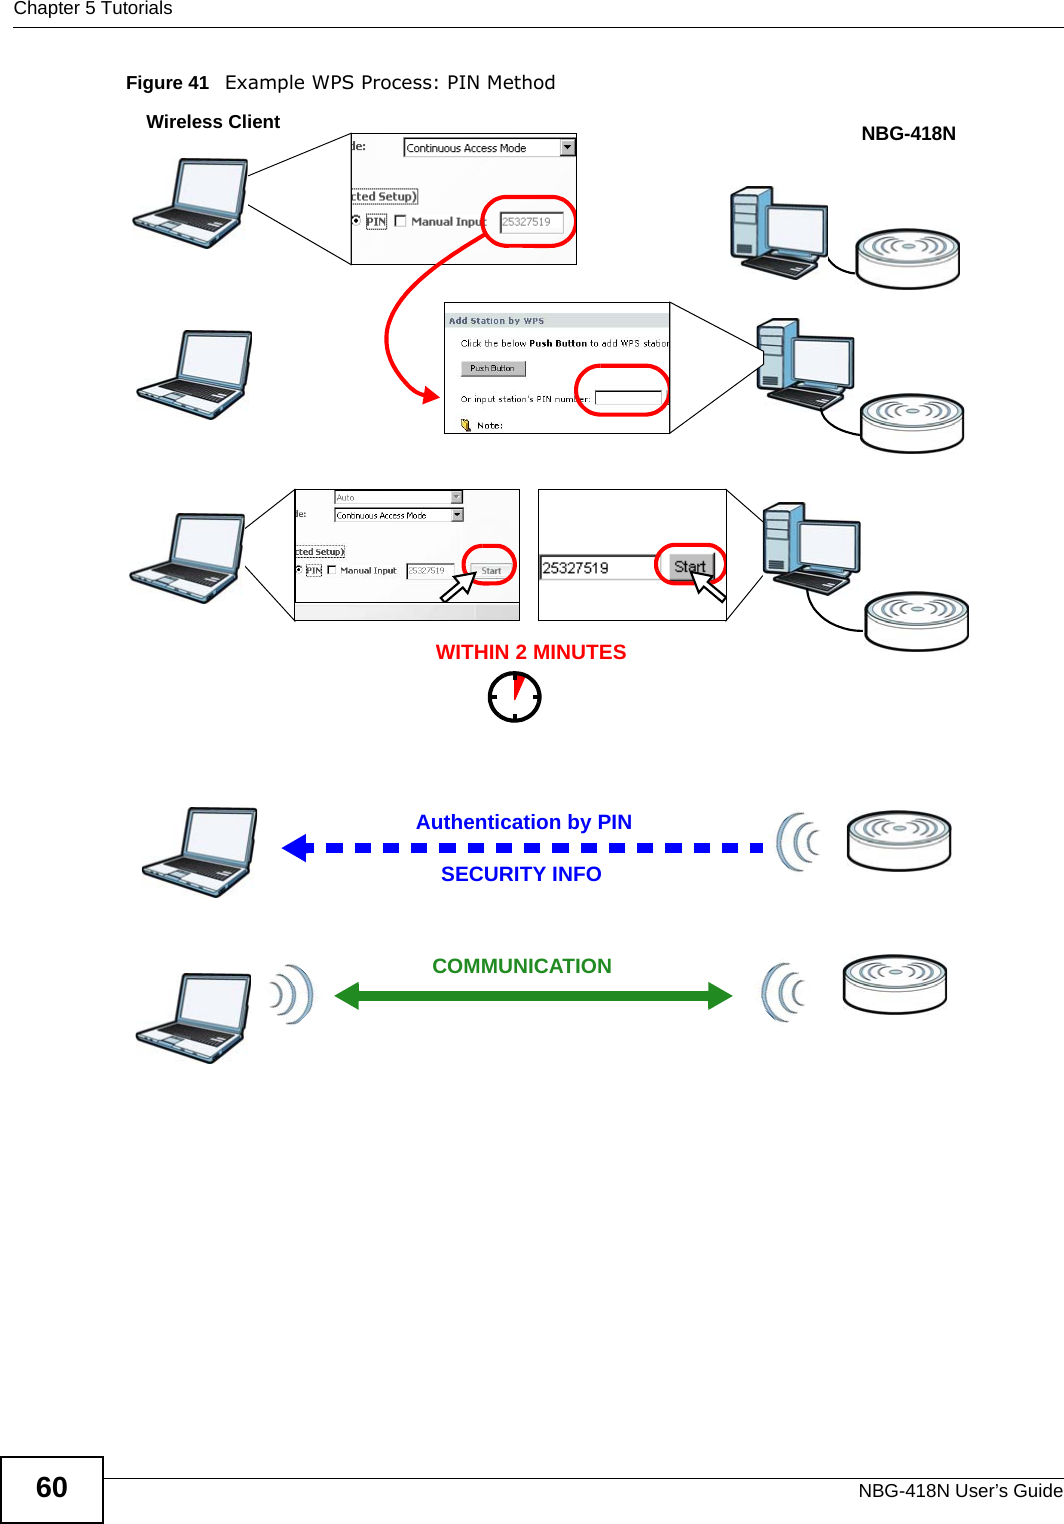 Chapter 5 TutorialsNBG-418N User’s Guide60Figure 41   Example WPS Process: PIN MethodAuthentication by PINSECURITY INFOWITHIN 2 MINUTESWireless ClientNBG-418NCOMMUNICATION